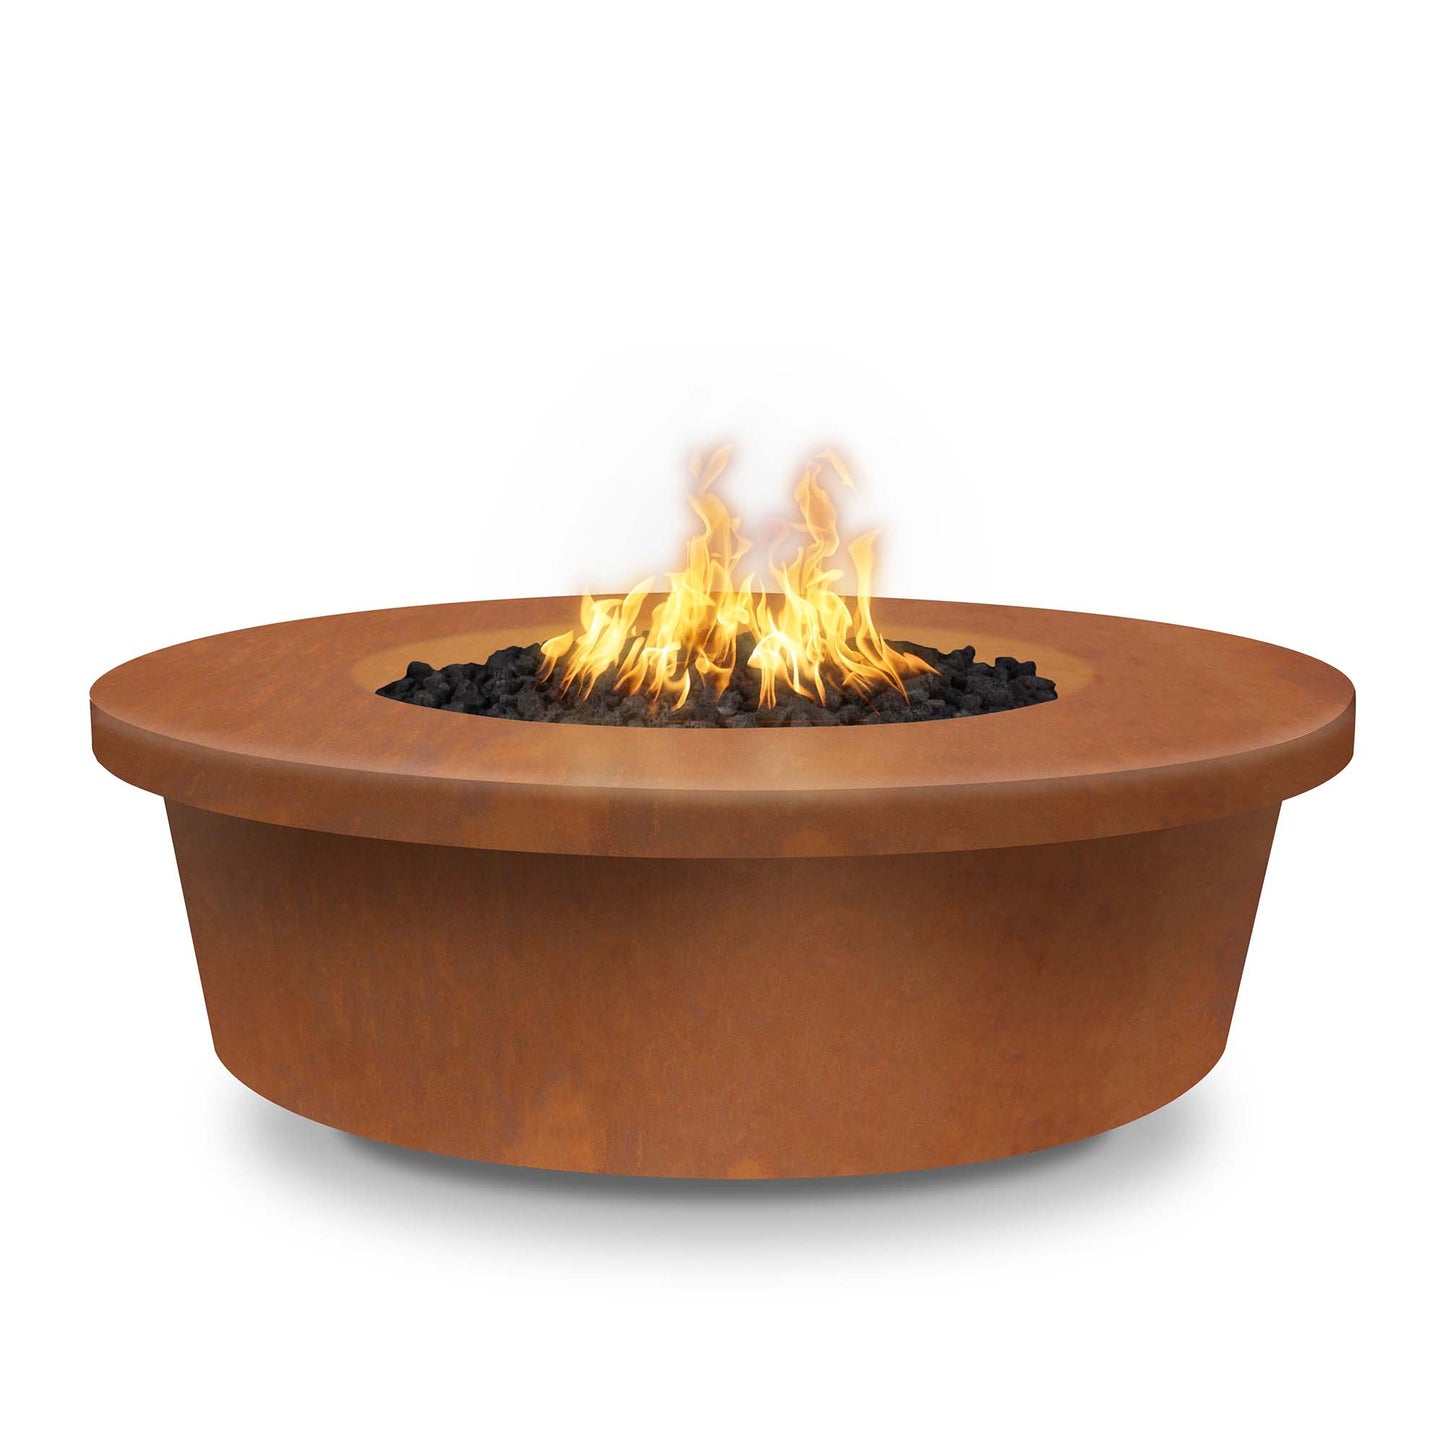 The Outdoor Plus Round Tempe 48" Hammered Copper Liquid Propane Fire Pit with Flame Sense with Spark Ignition